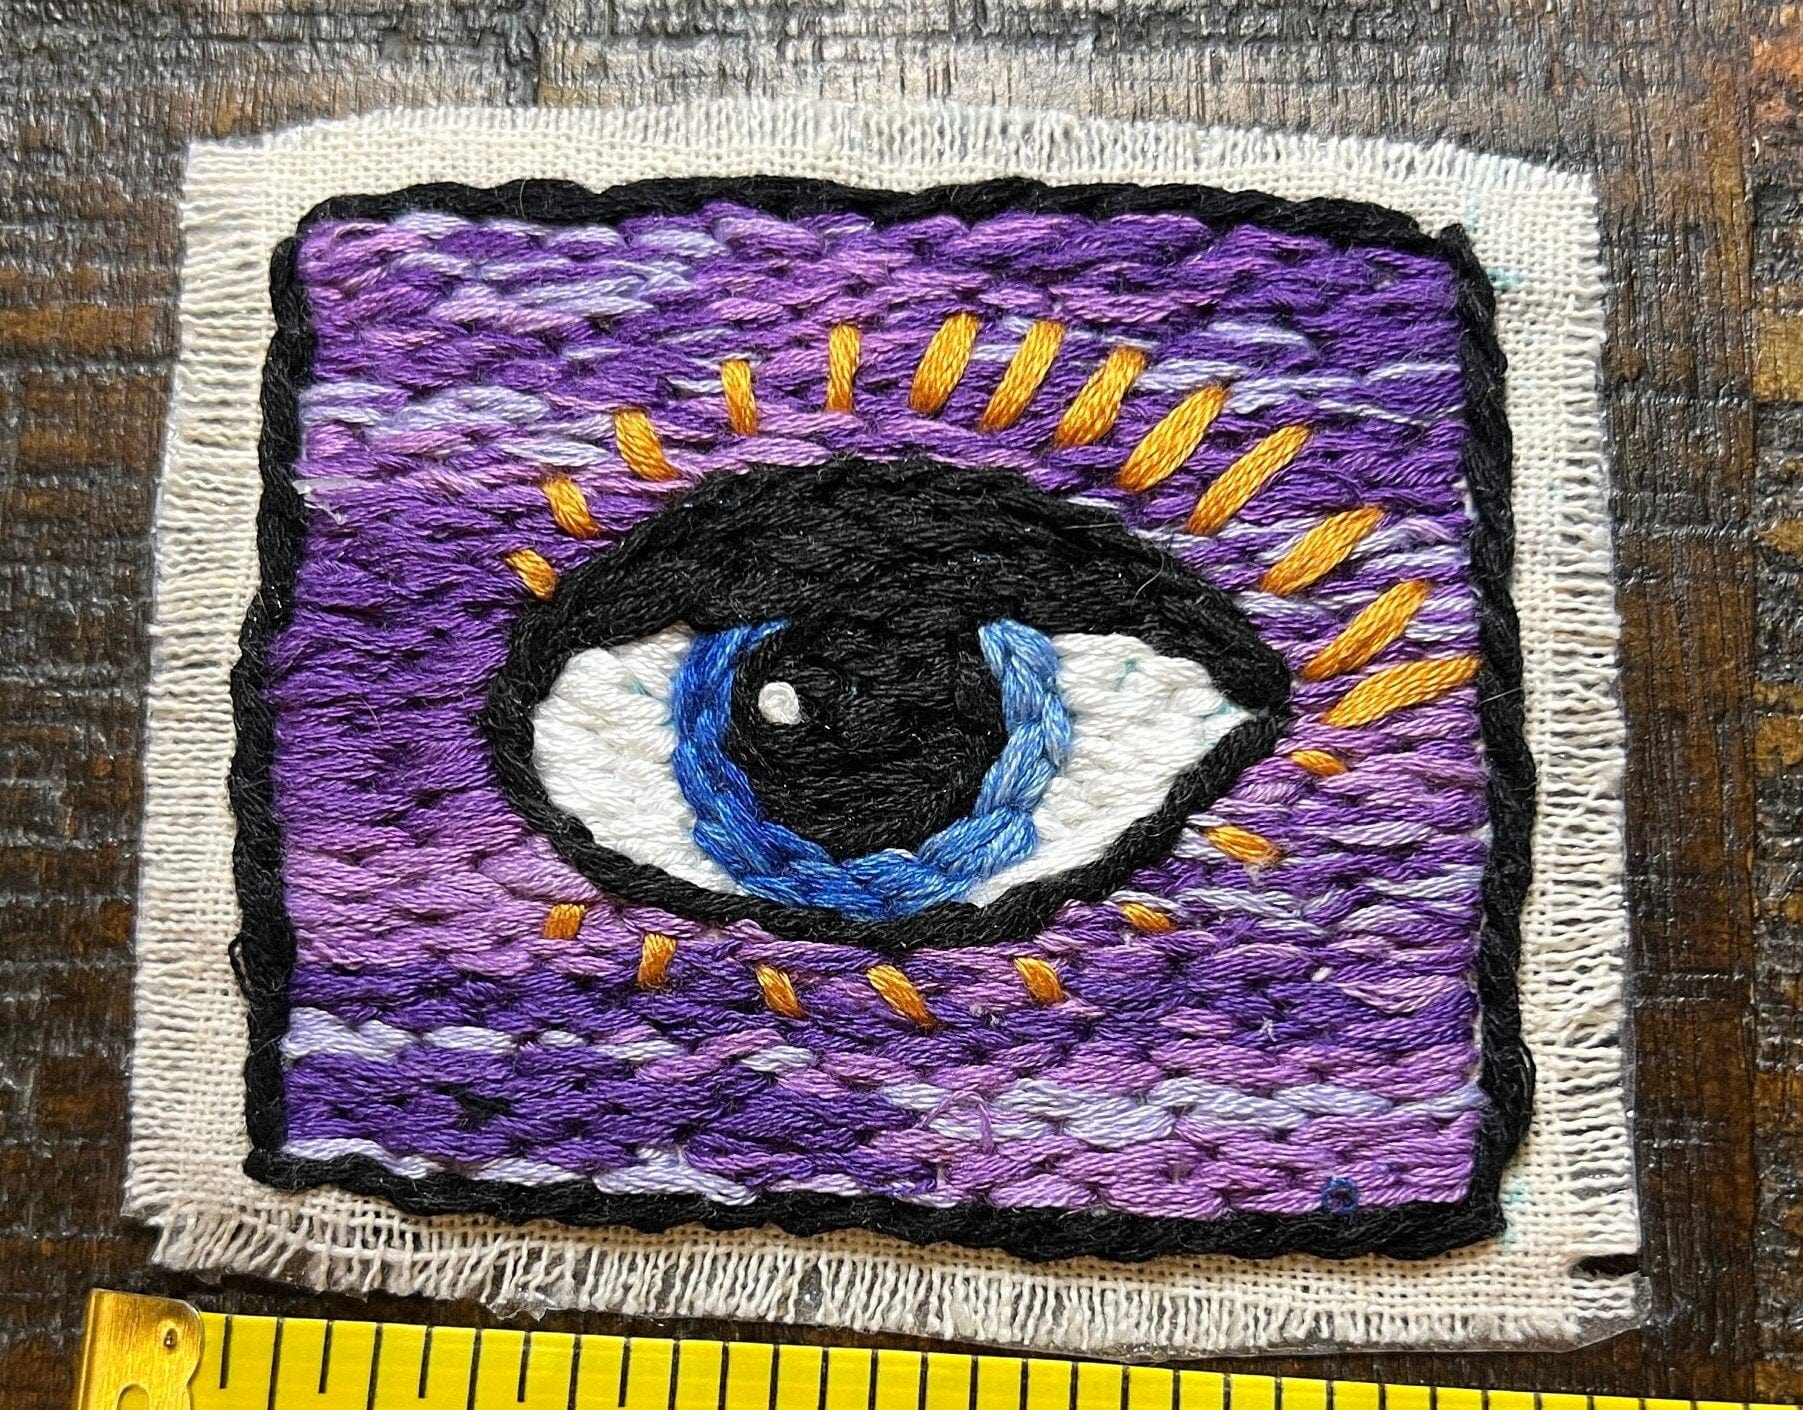 EYE Hand Stitched Original Design SOULE PATCH art Iron On patch embroidered Protective Eye stitched gifts patchwork stitch art ironons gifts Appliques & Patches